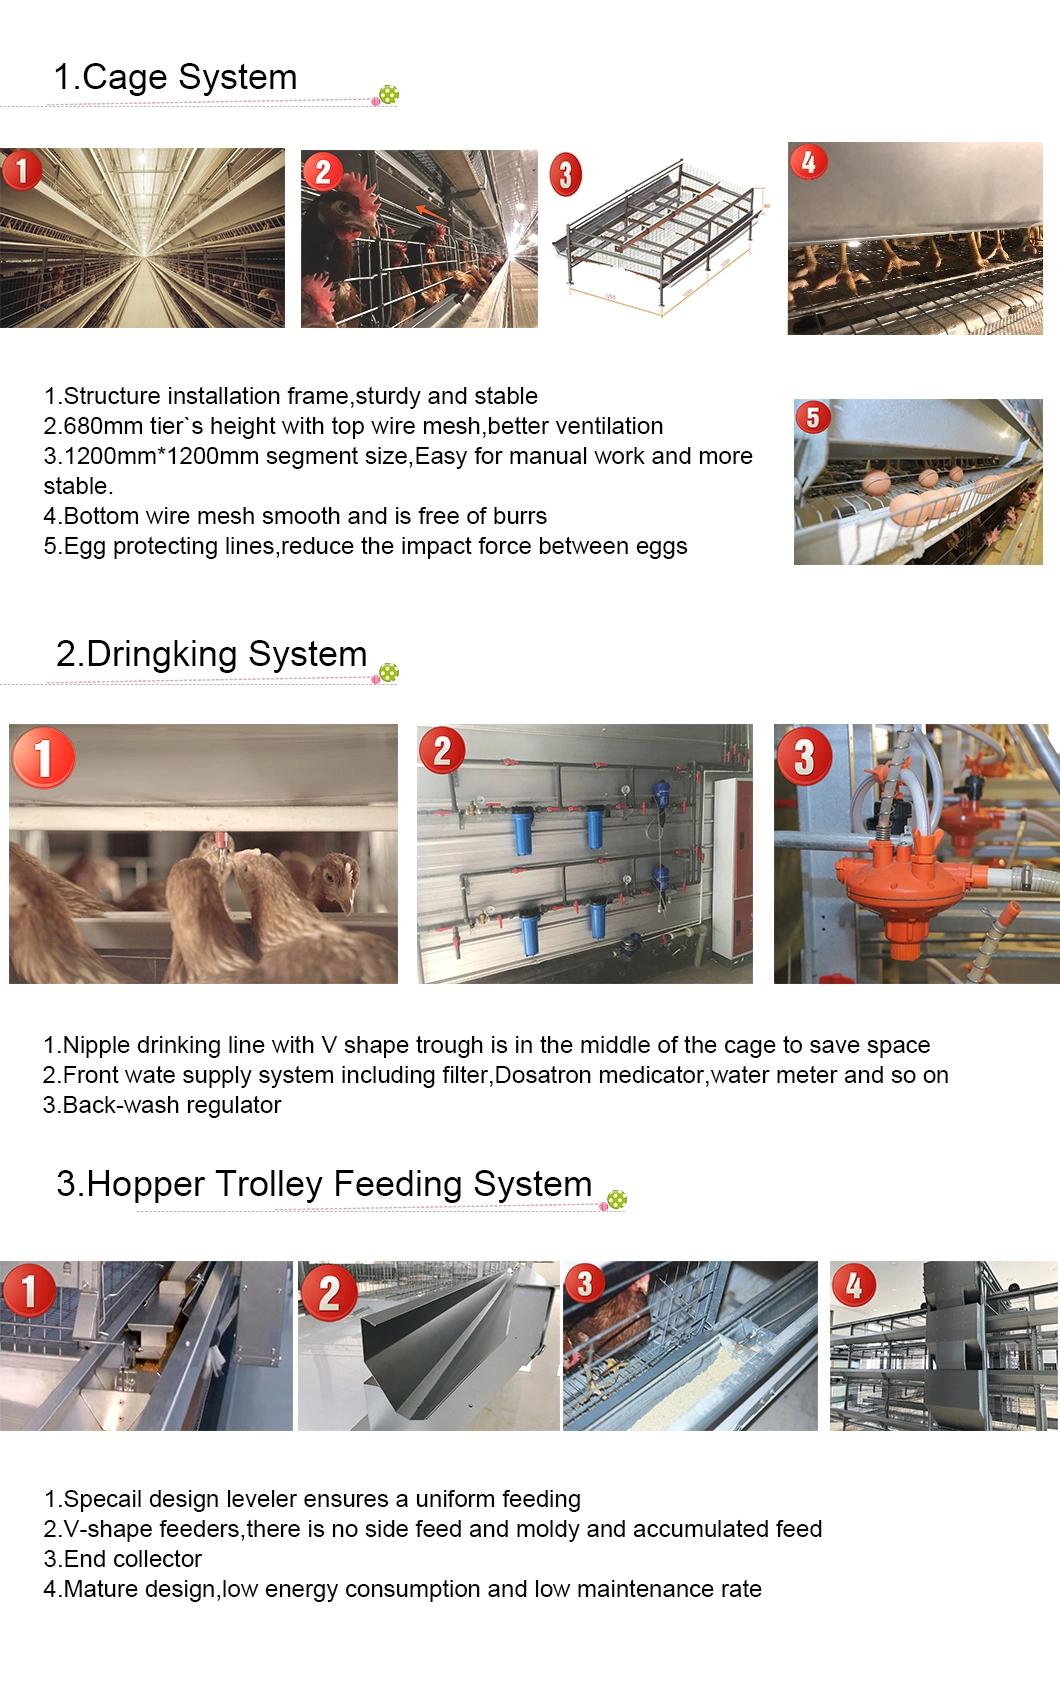 New Poultry Drinkers Computerized Dairy Machine Mature Design Egg Factory Equipment